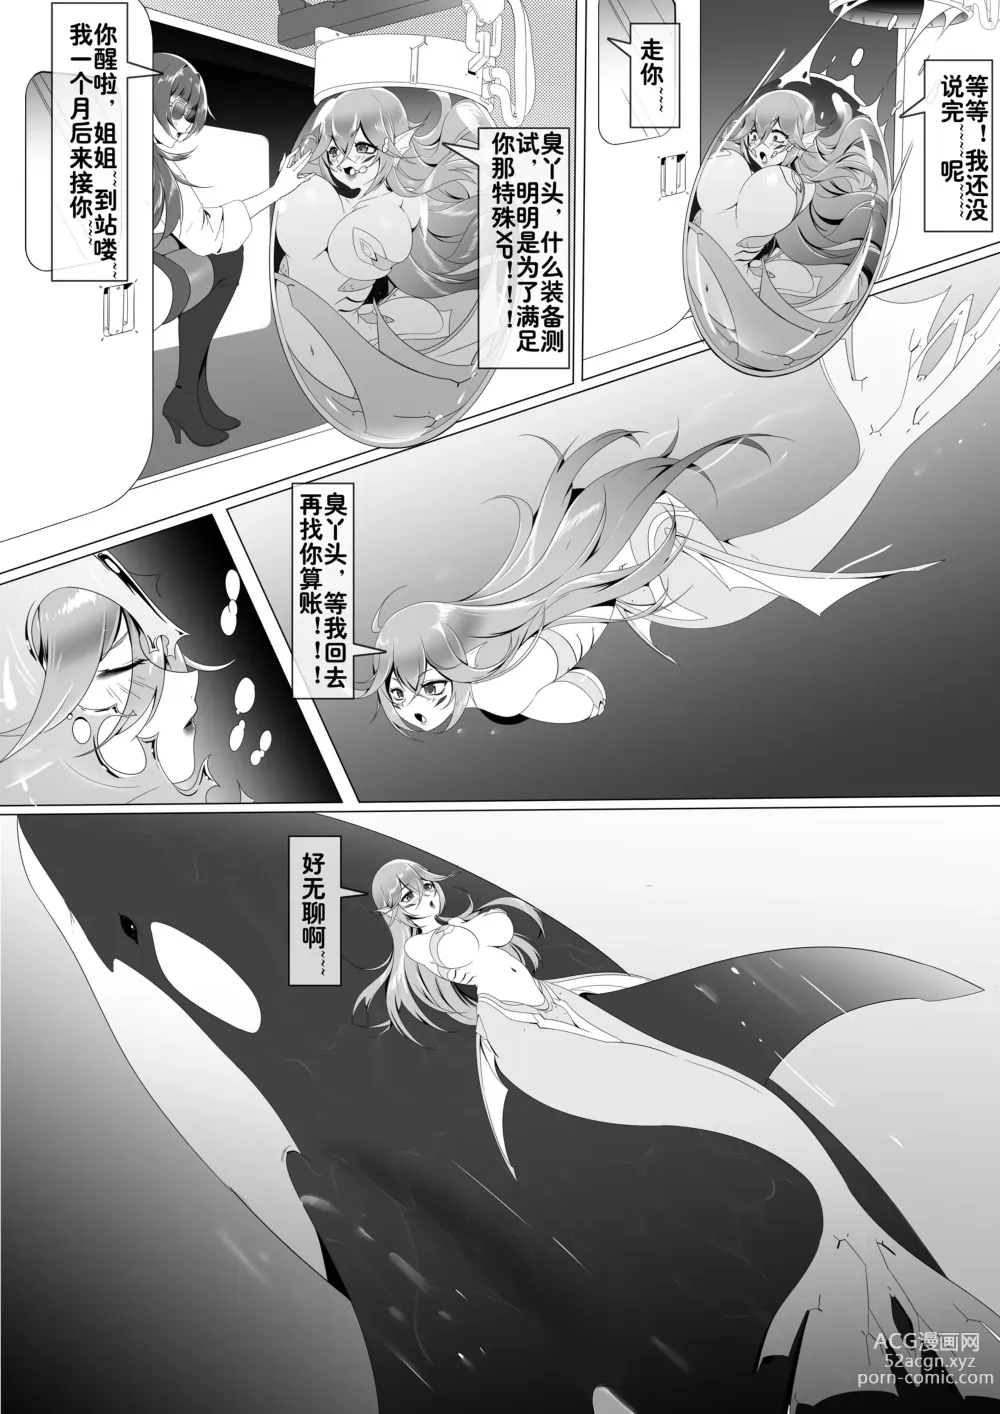 Page 7 of manga 【 The Sword that Can Fly 】Special equipment